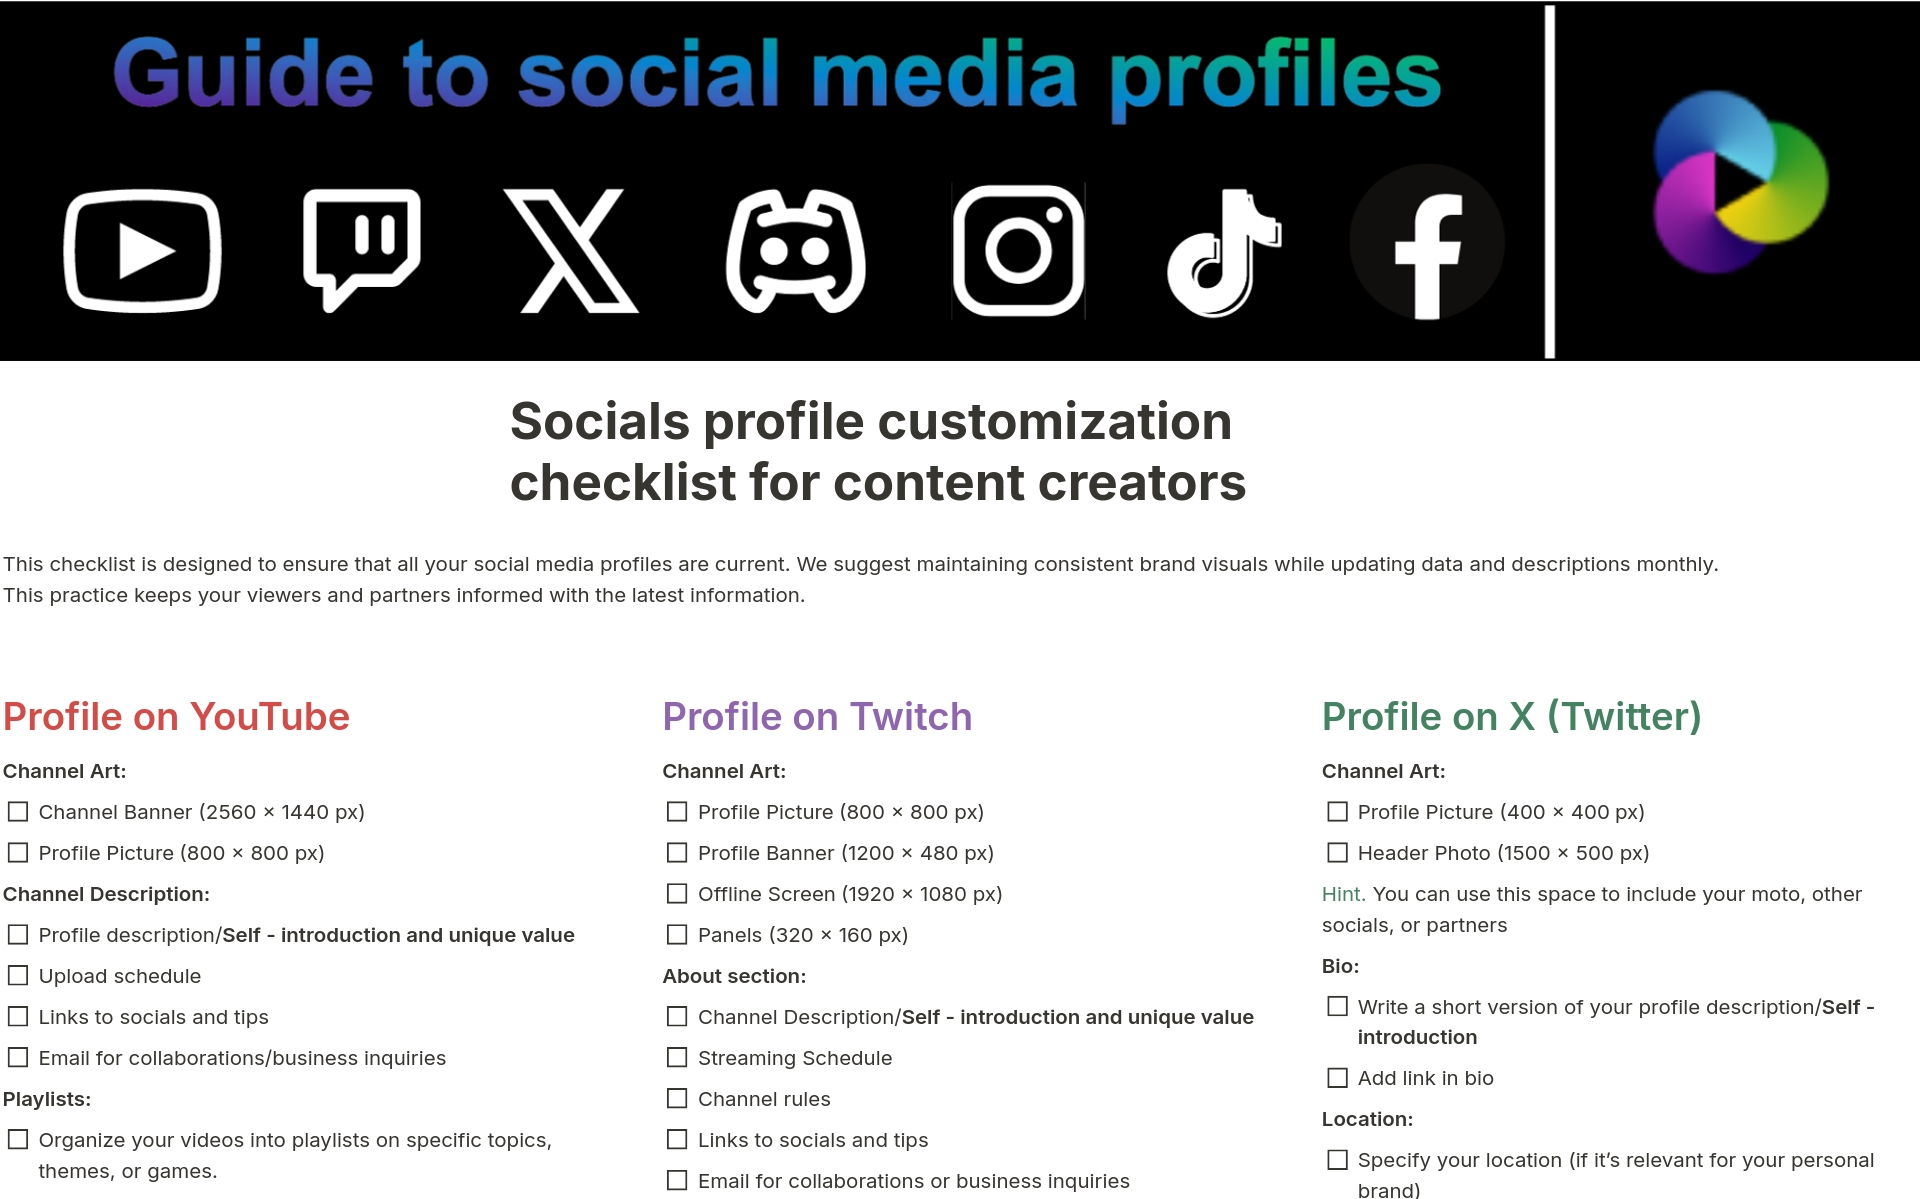 This checklist is designed to ensure that all your social media profiles are current. We suggest maintaining consistent brand visuals while updating data and descriptions monthly. This practice keeps your viewers and partners informed with the latest information.